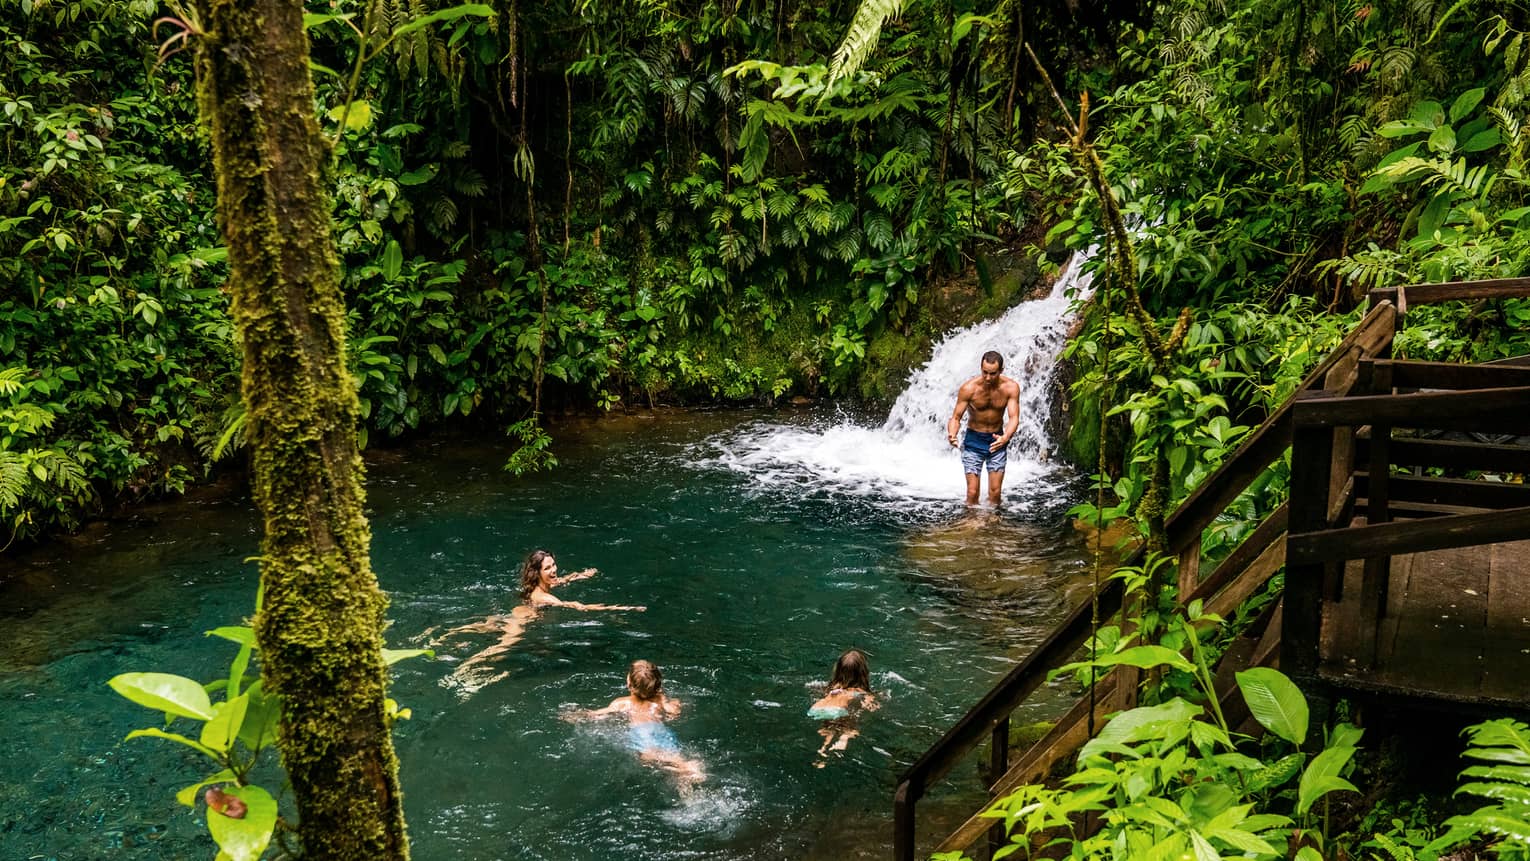 Two adults and two kids frolic at the foot of a waterfall surrounded by lush jungle greenery